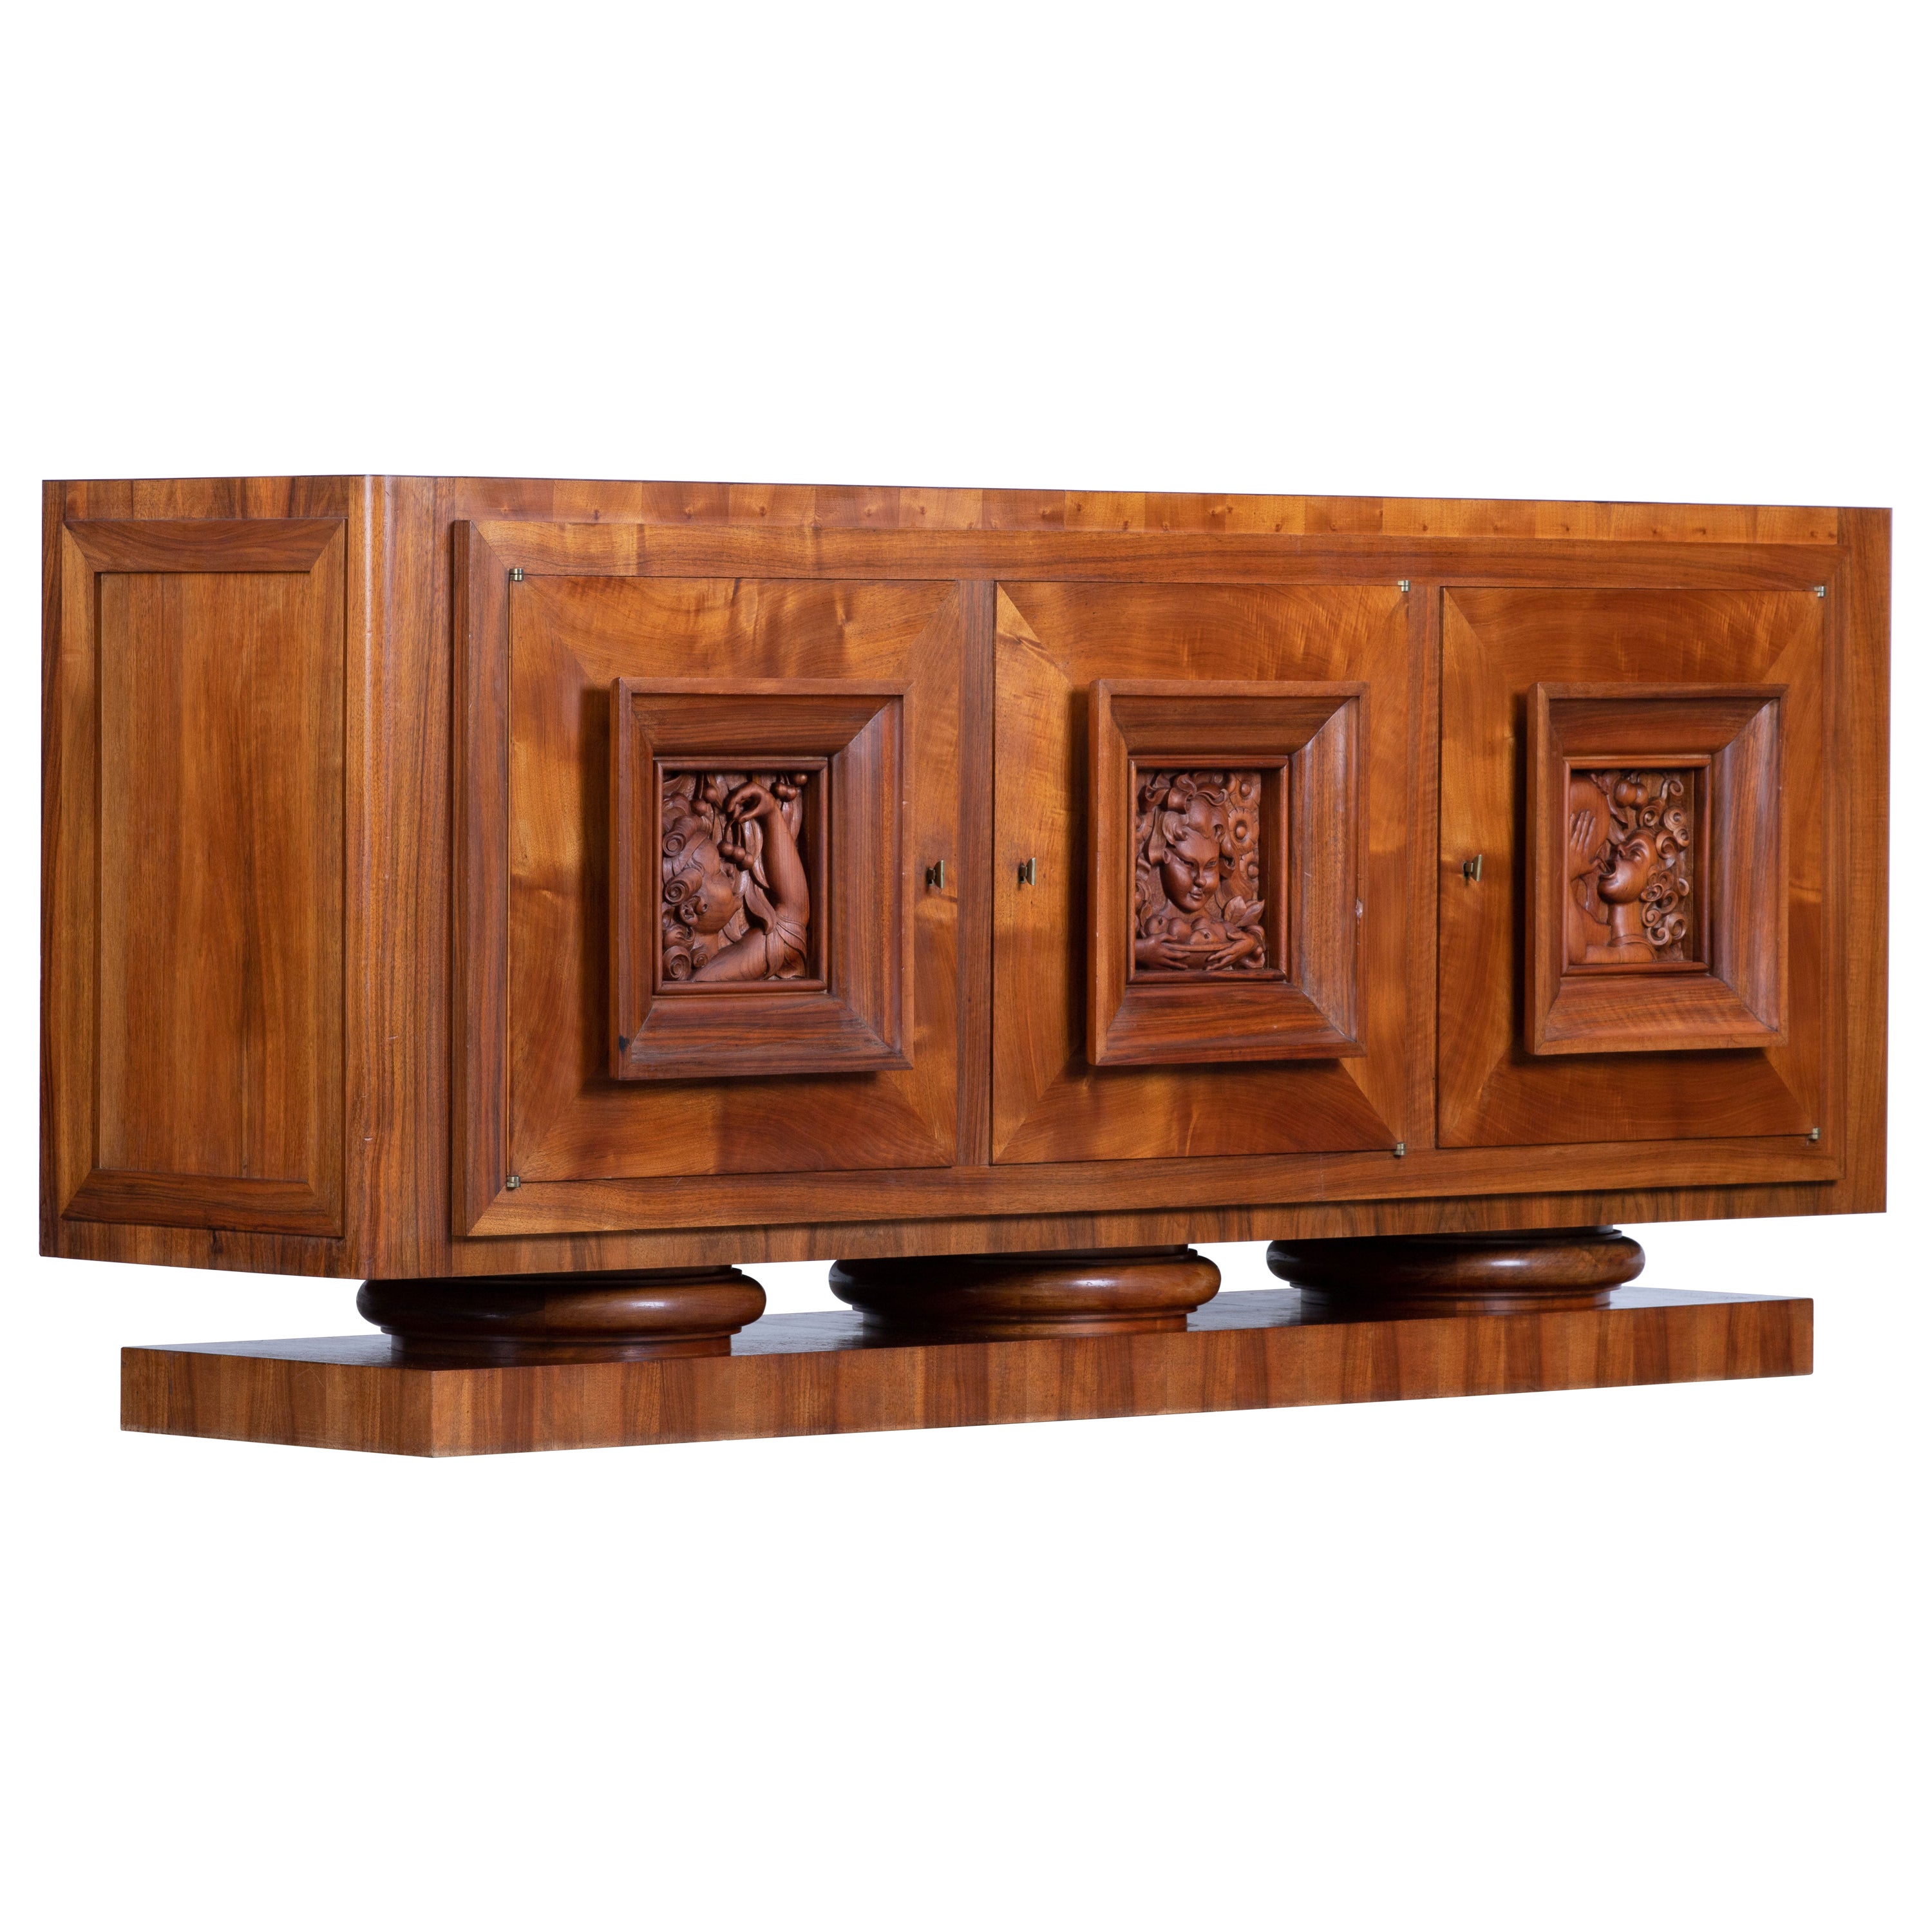 Credenza, solid oak, France, 1940s.
Large Art Deco Brutalist sideboard. This heavy Brutalist credenza seems to float on its elegant base. The credenza consists of three large storage facilities and covered with hand sculptured door panels. The